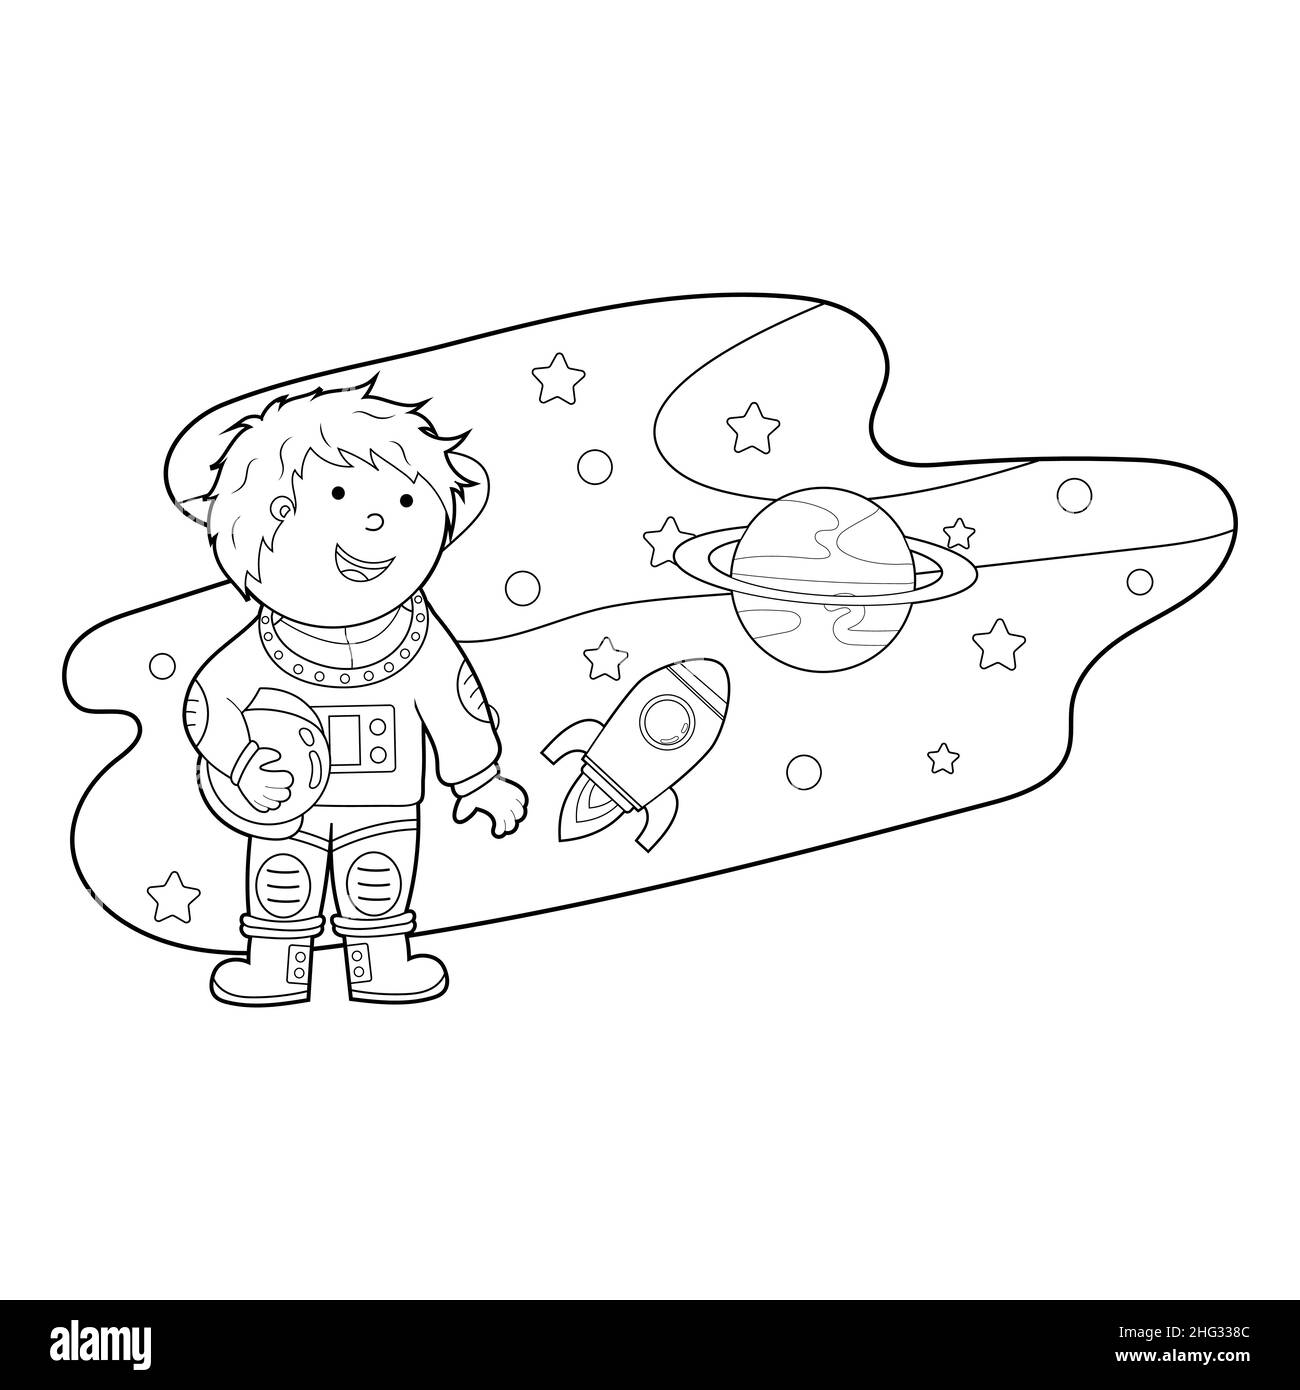 coloring book, color a cartoon illustration of an astronaut in space, vector isolated on a white background Stock Vector